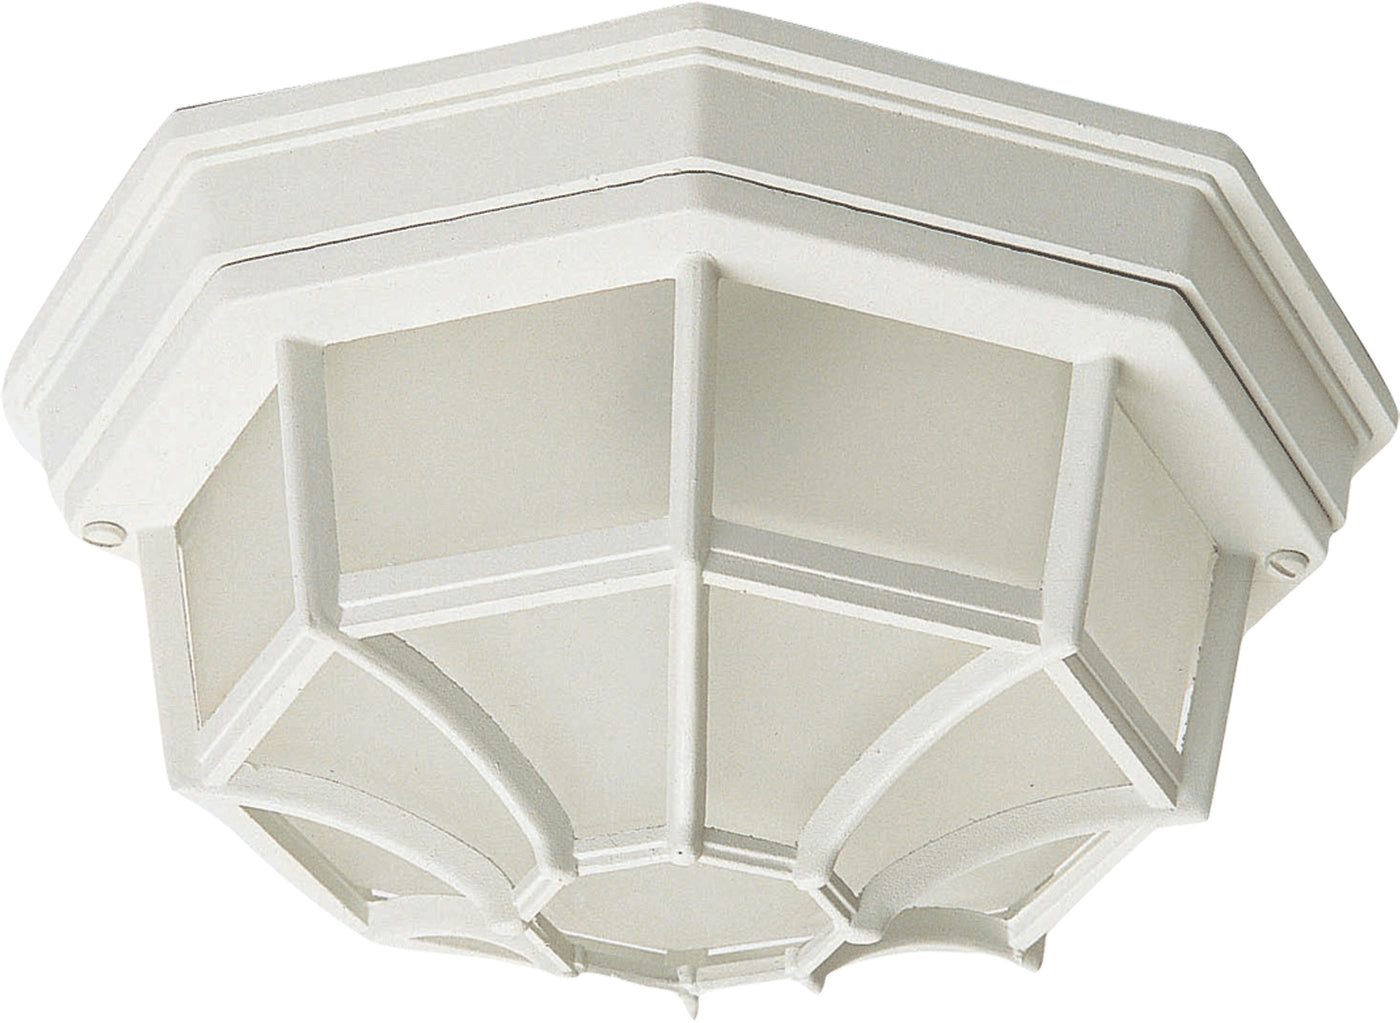 Crown Hill 2-Light Outdoor Ceiling Mount